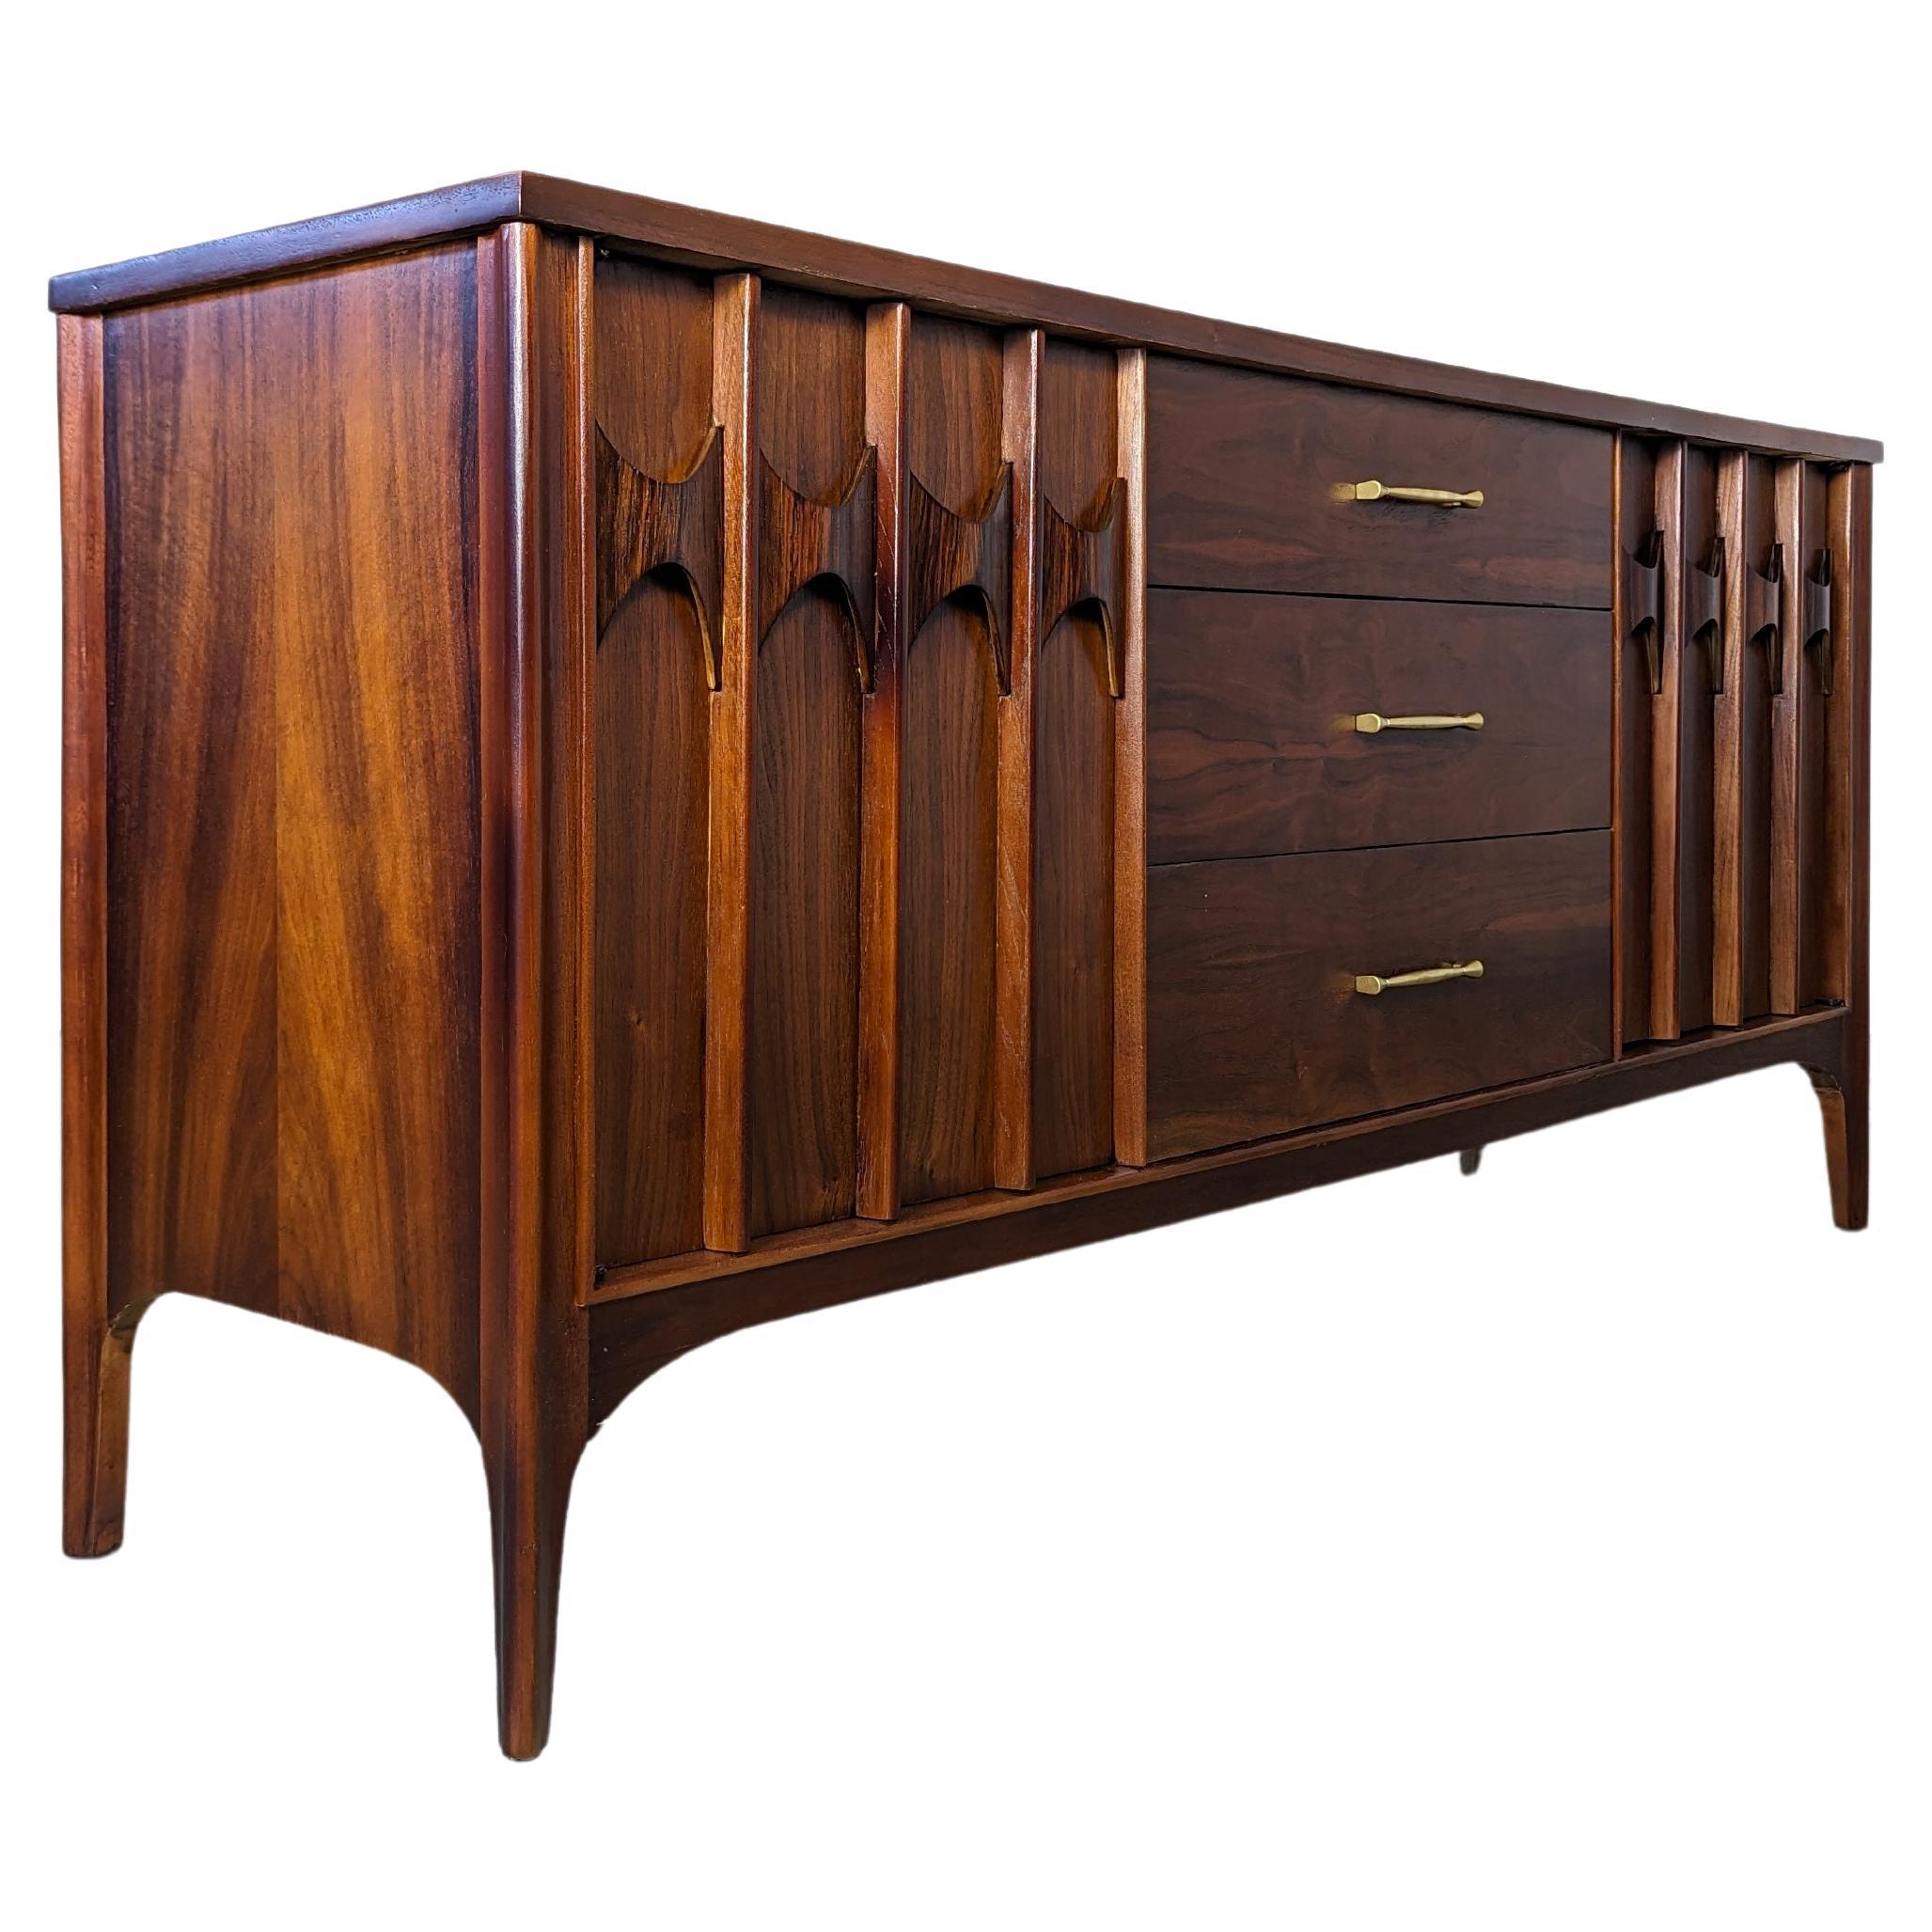 For sale is a magnificent mid-century modern dresser, the 'Perspecta' by the renowned American manufacture Kent Coffey. Dating back to the 1960s, this striking piece is an excellent example of the timeless mid-century aesthetic, renowned for its